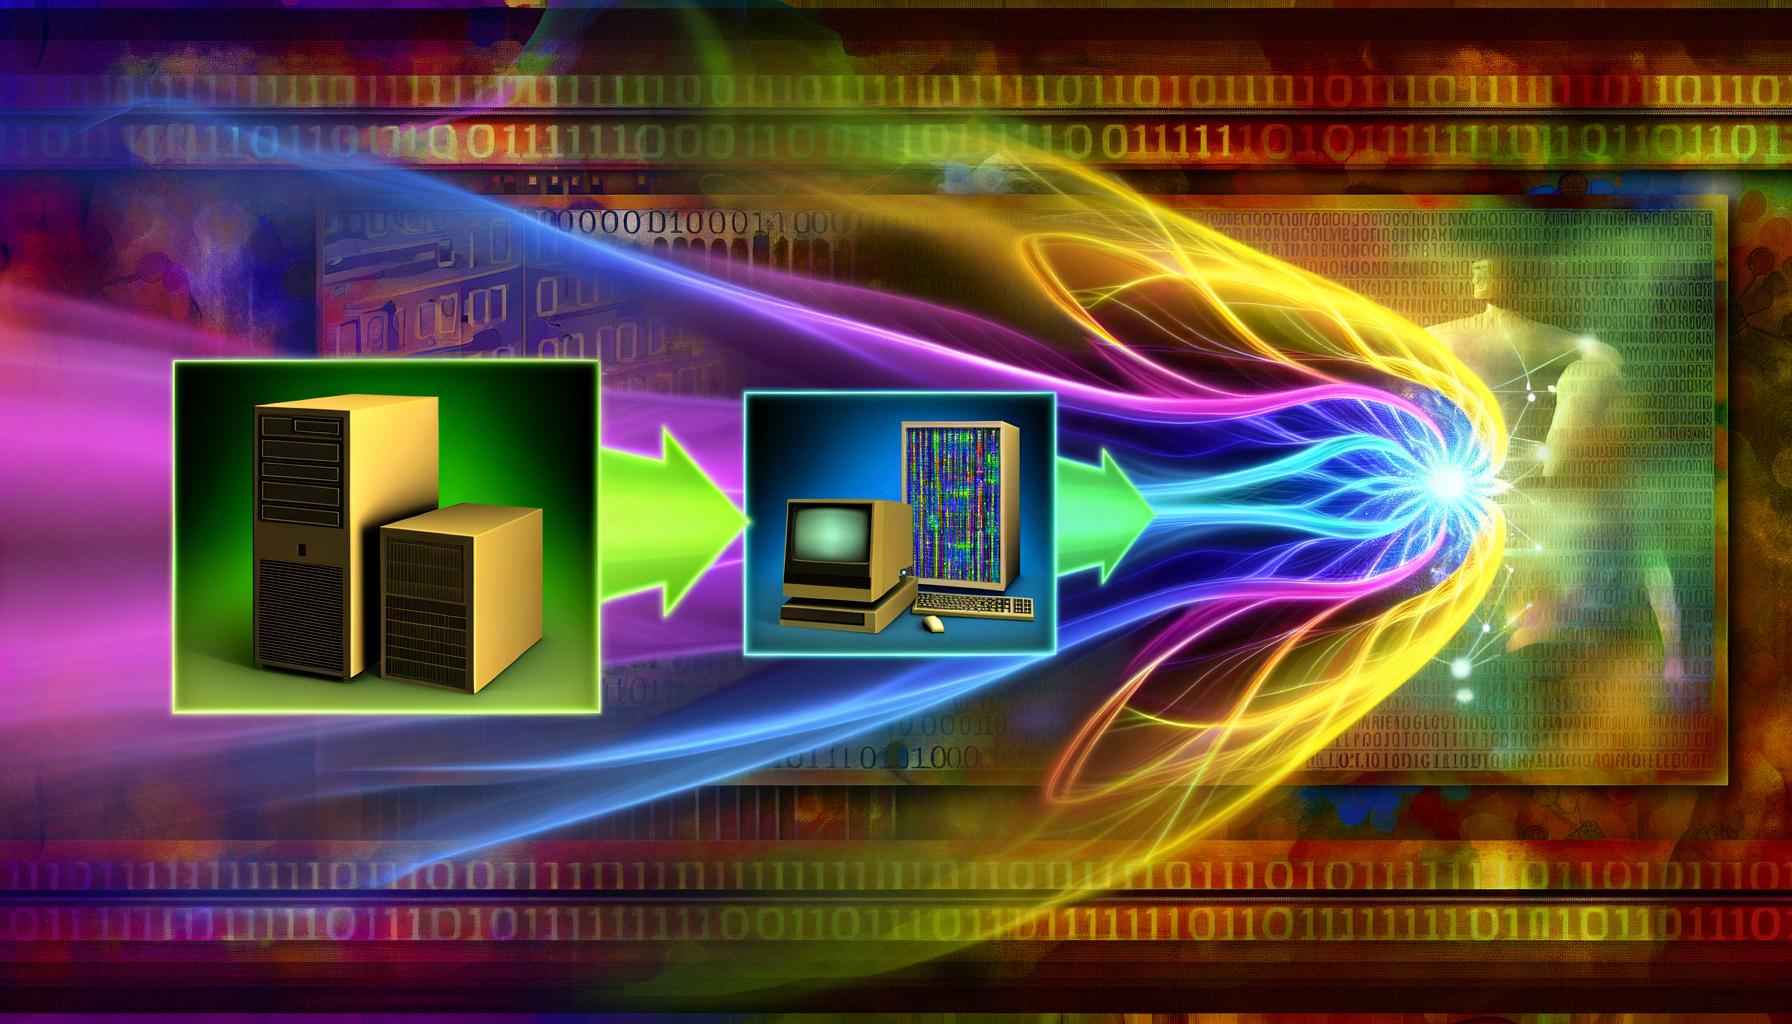 Quantum computing achieves key technological, security breakthroughs.